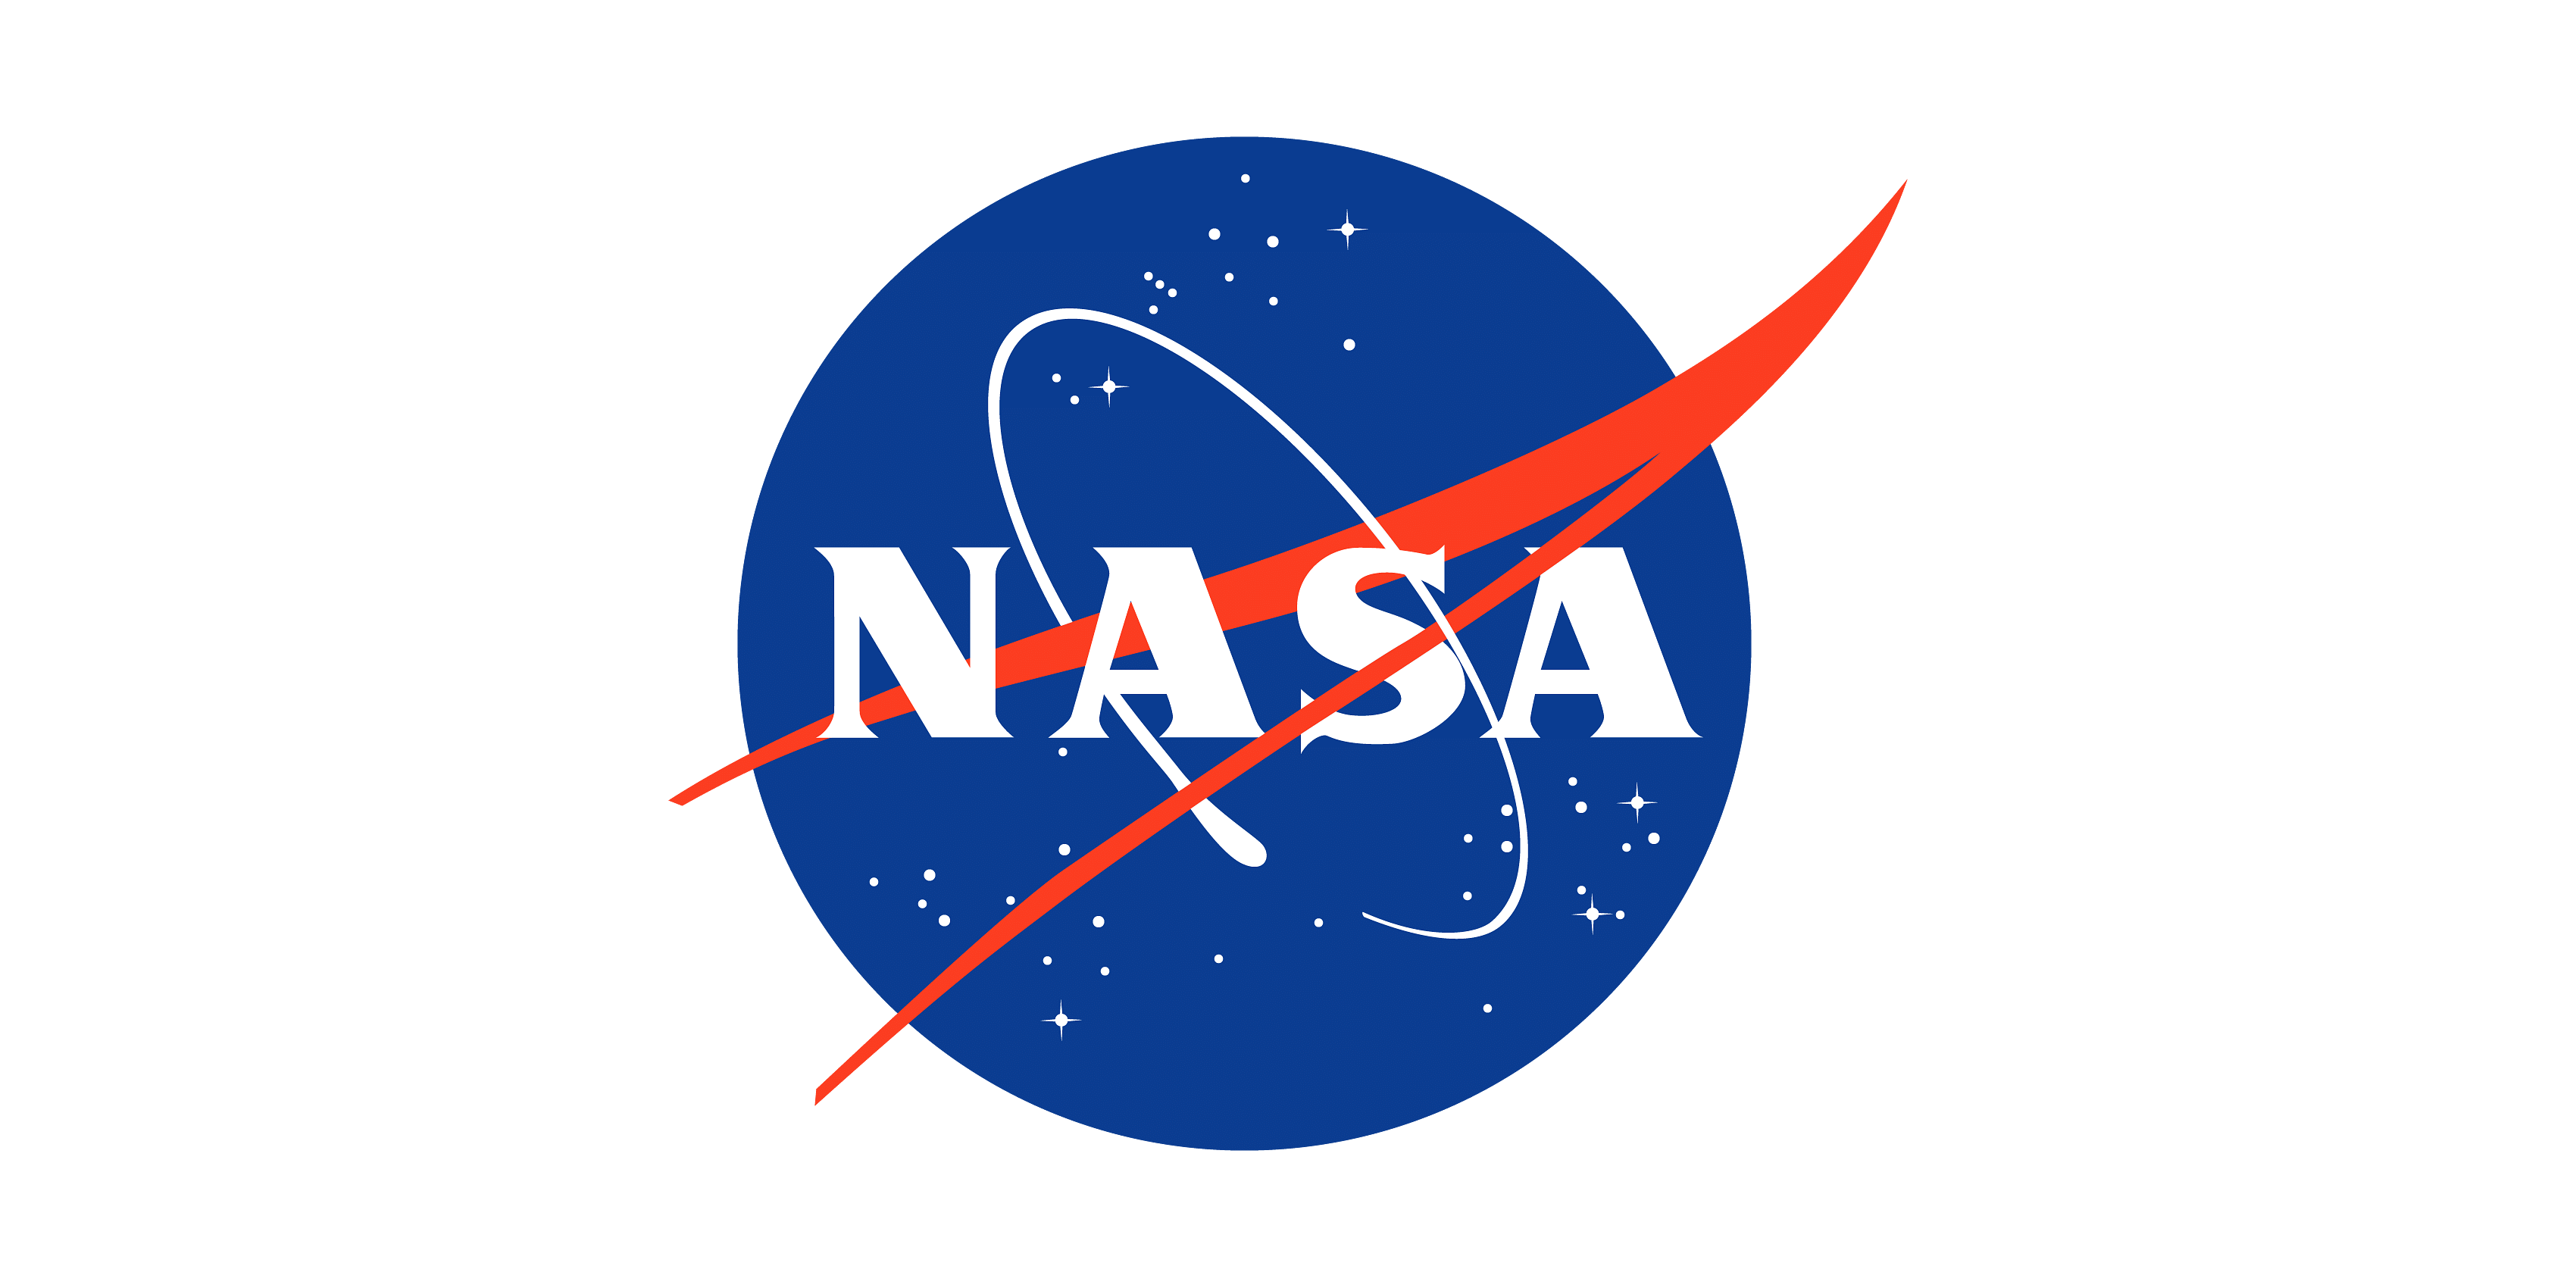 NASA, DARPA Will Test Nuclear Engine for Future Mars Missions - NASA